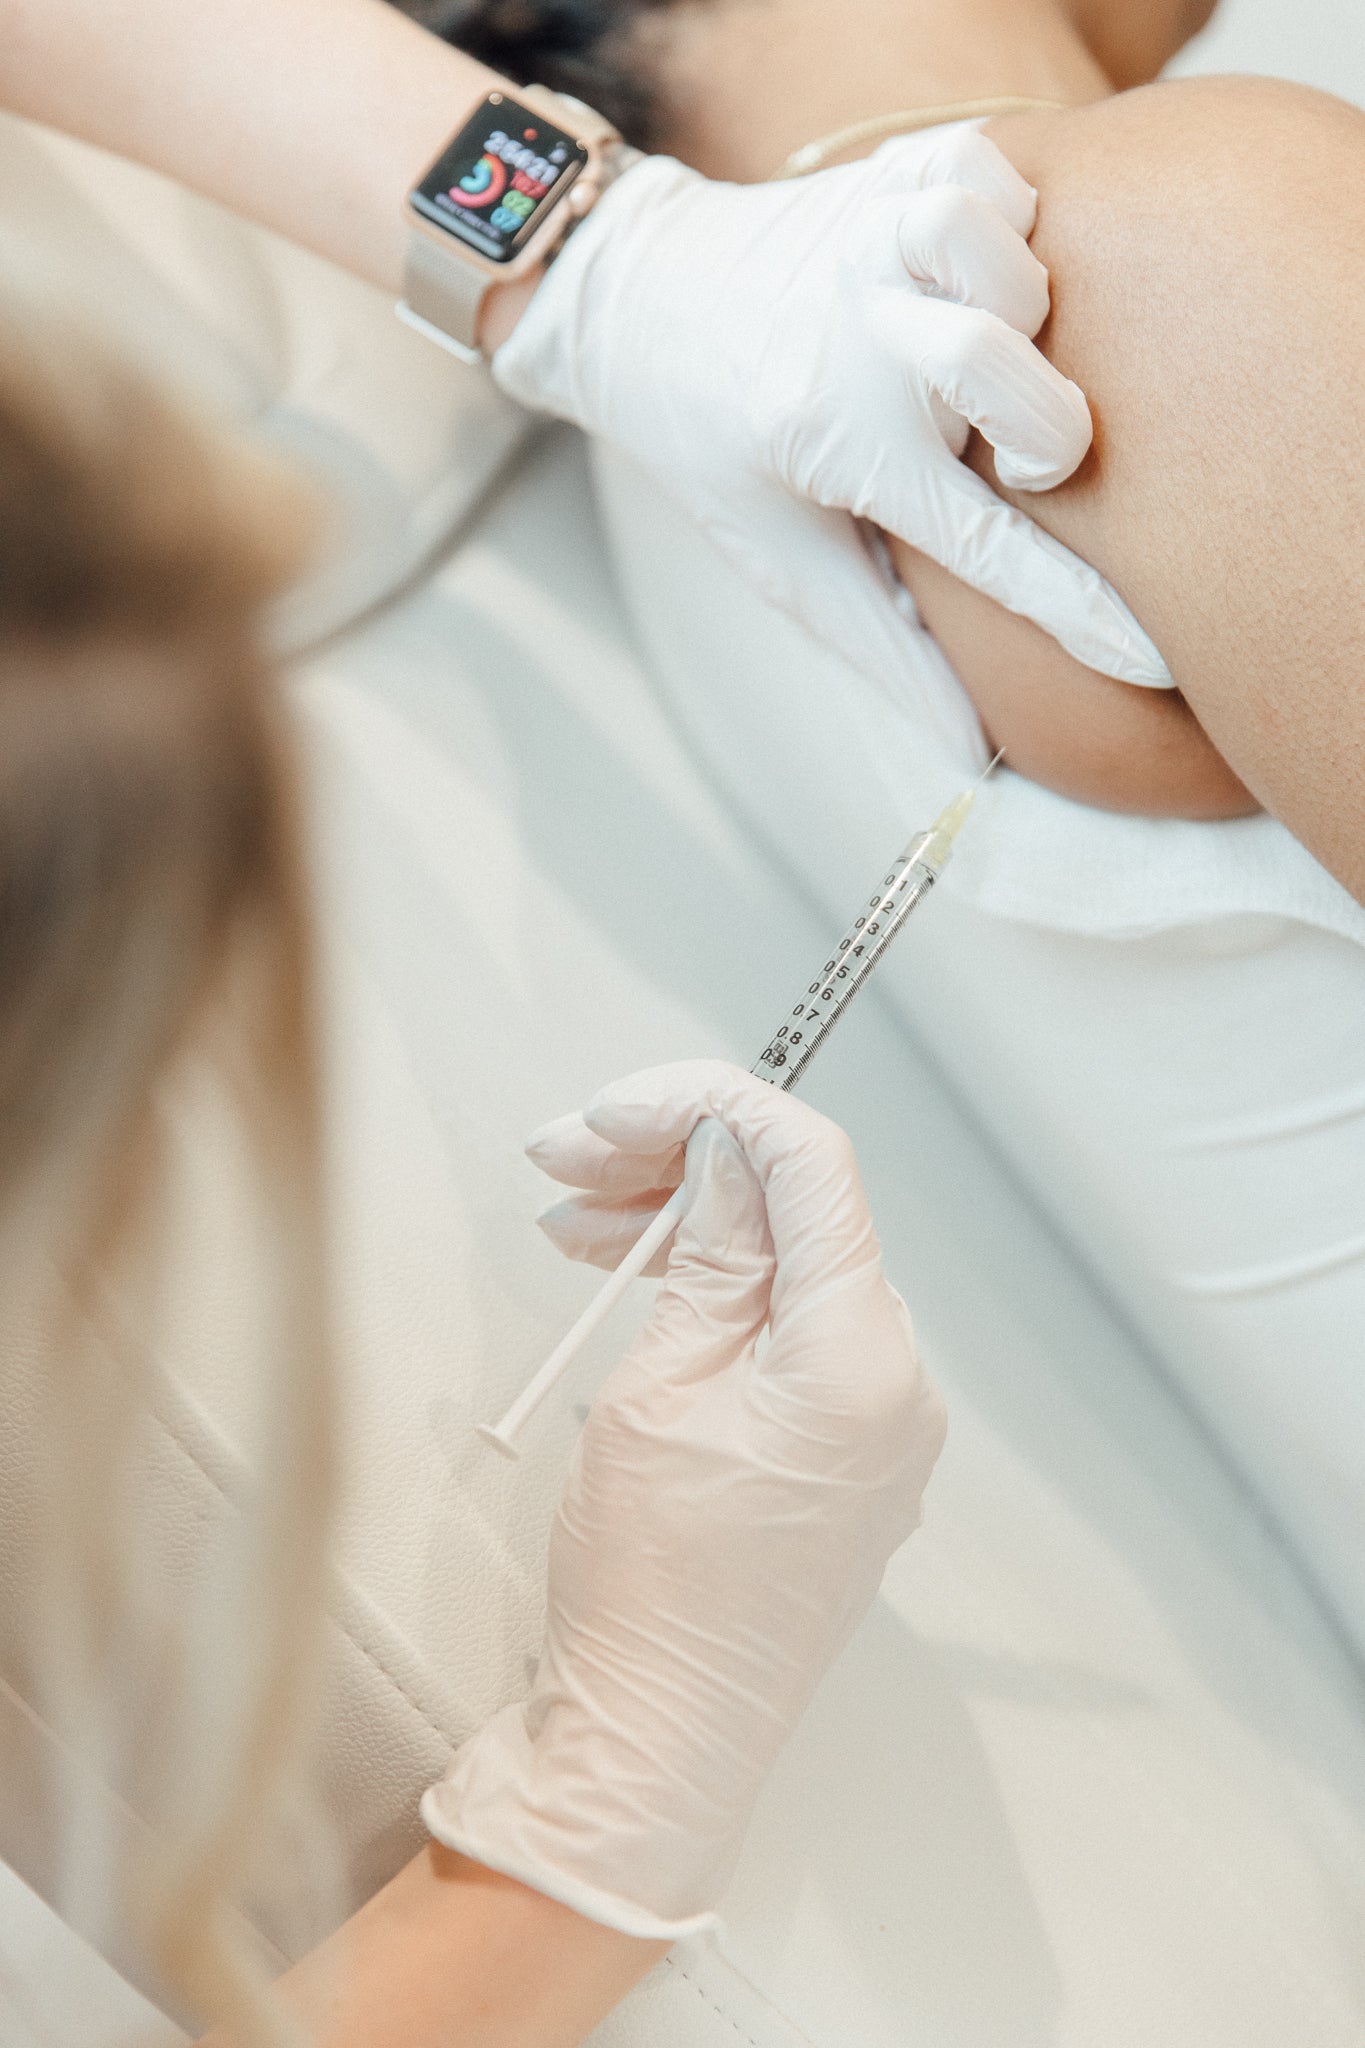 Everything You Need to Know Before Your Kybella Treatment